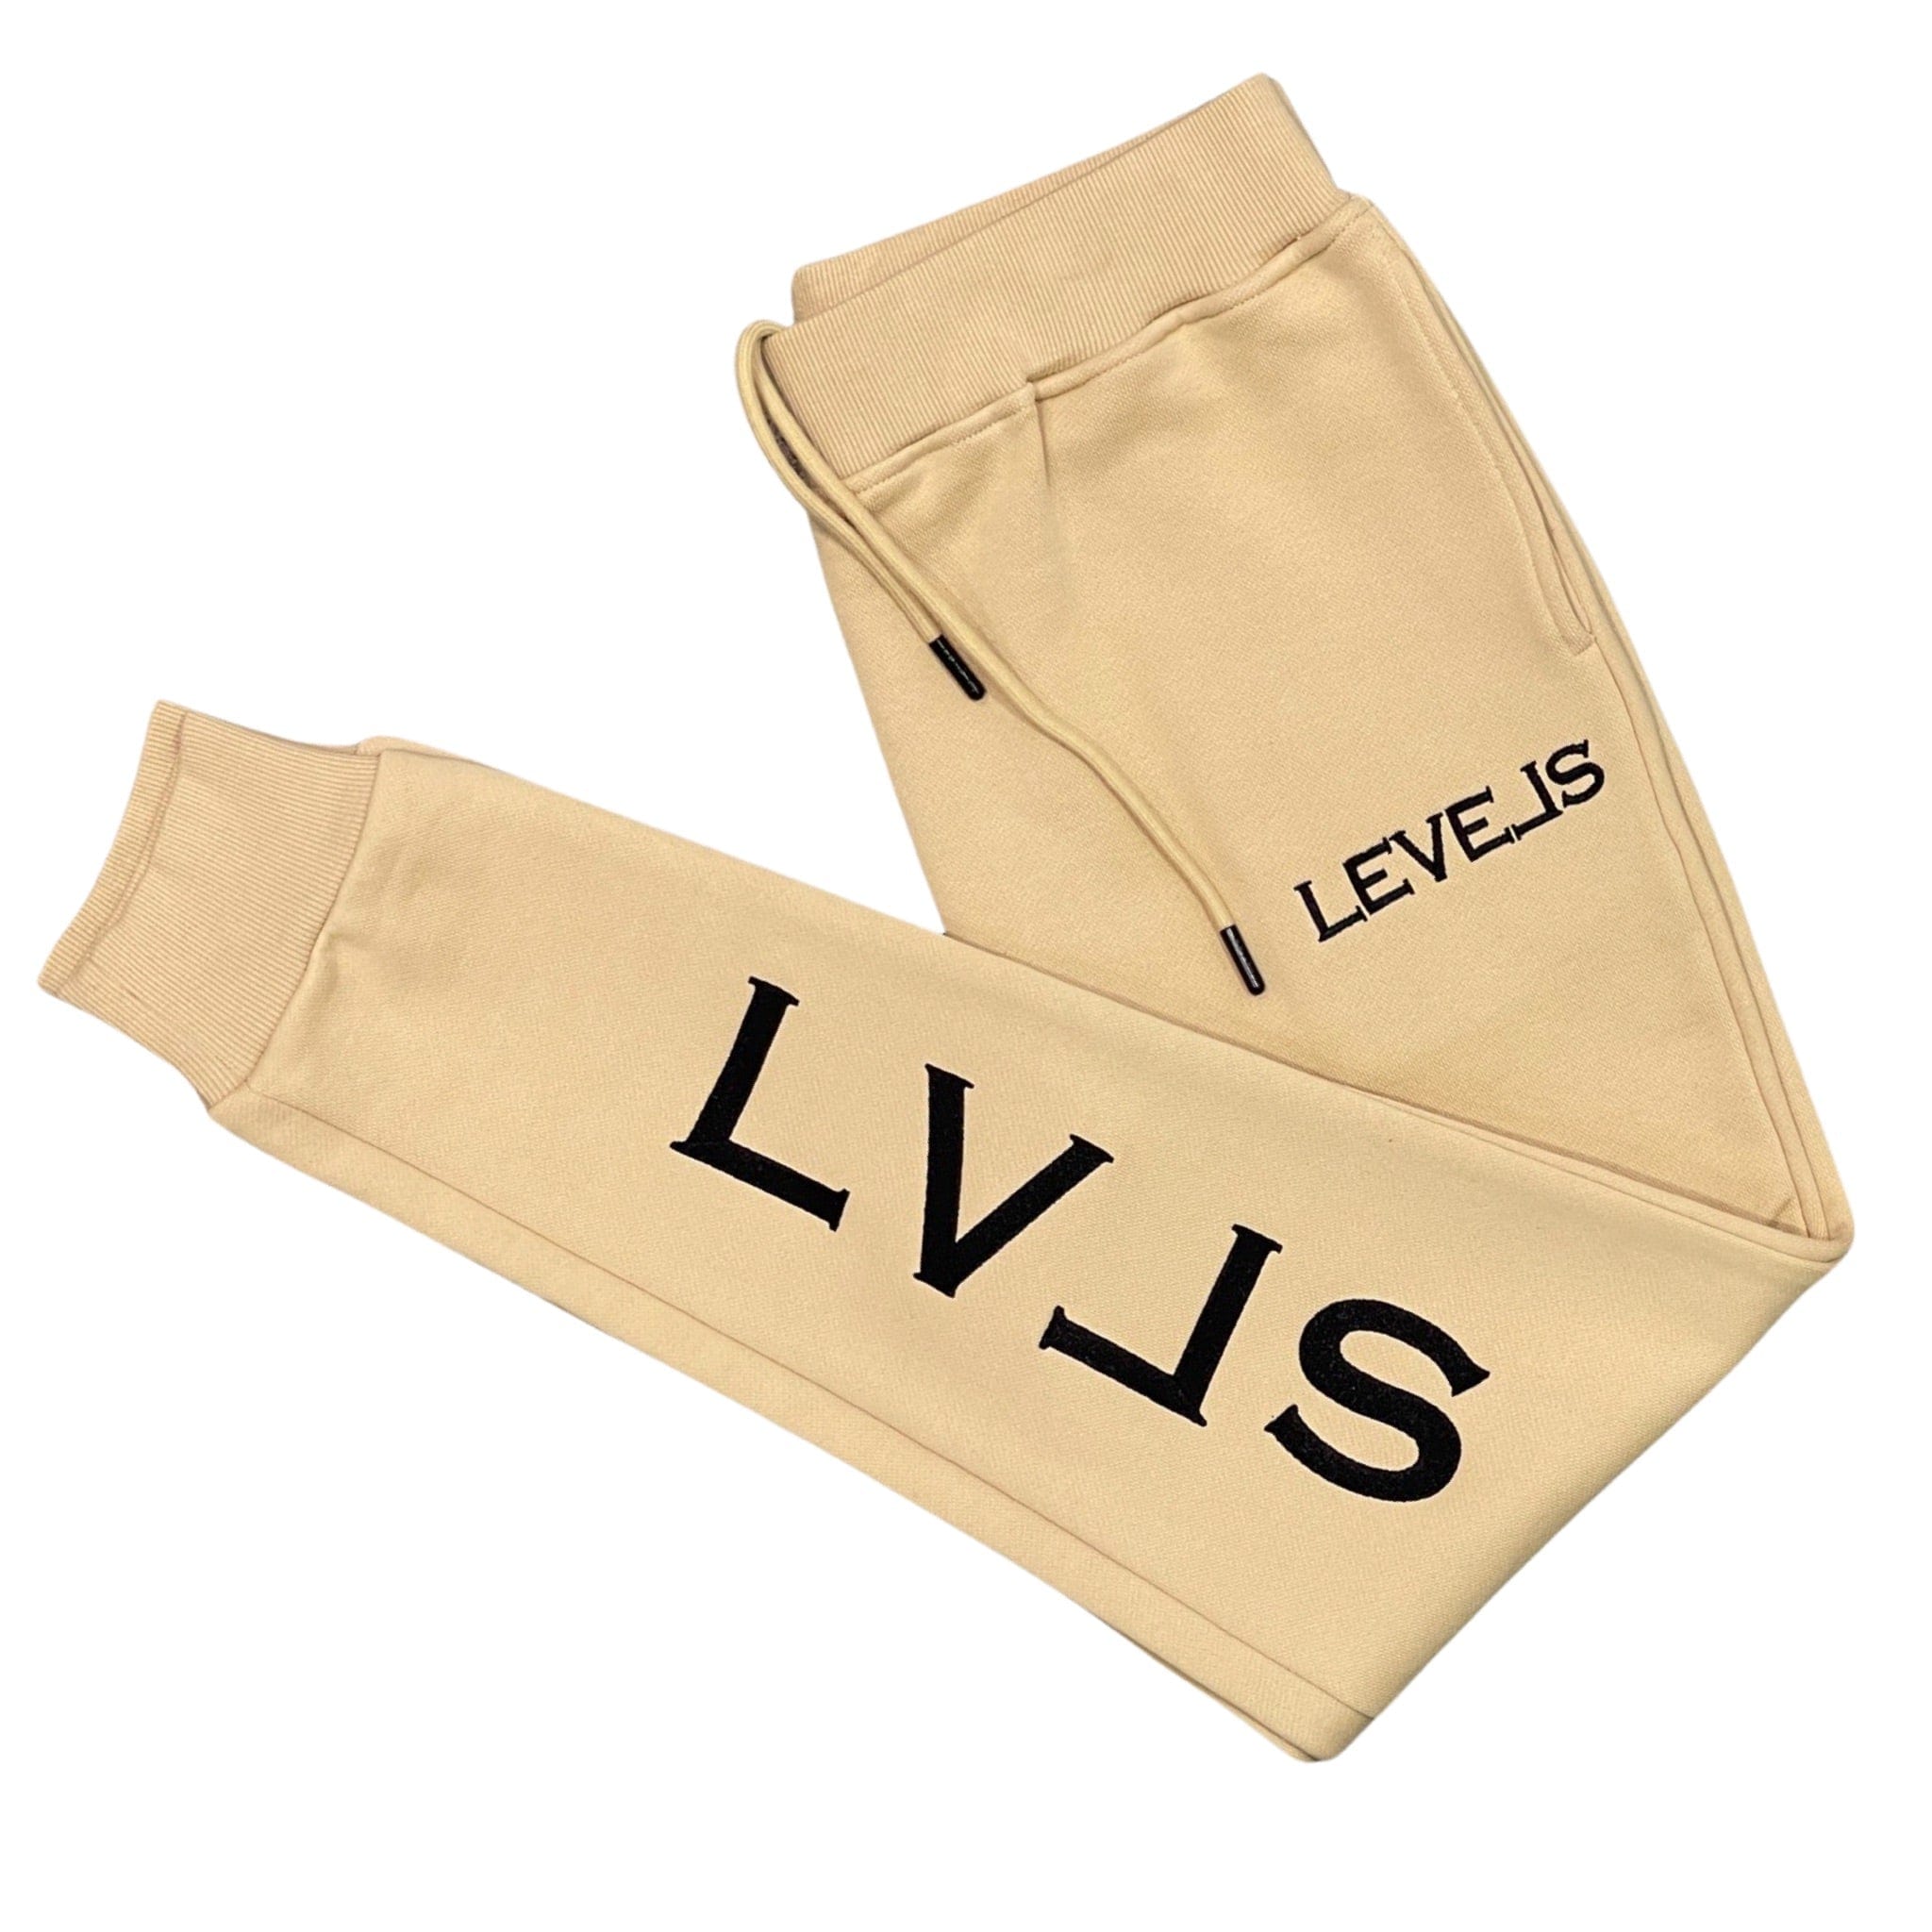 LEVELS, LLC Apparel & Accessories LUXE LVLS EMBROIDERED JOGGERS (NUDE)